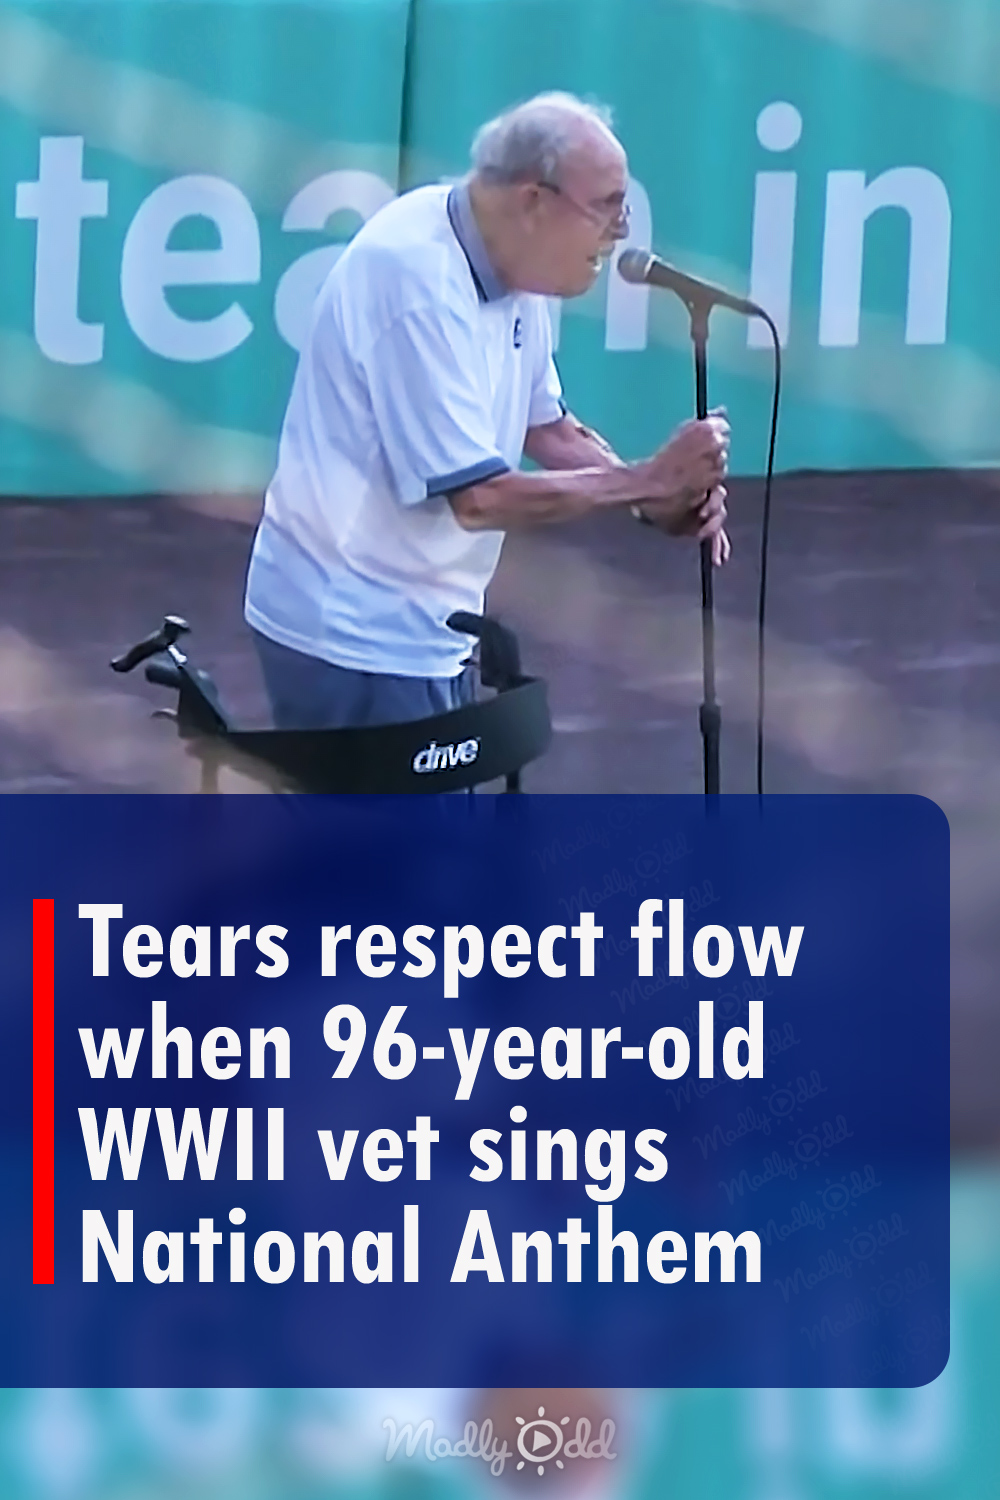 Tears respect flow when 96-year-old WWII vet sings National Anthem